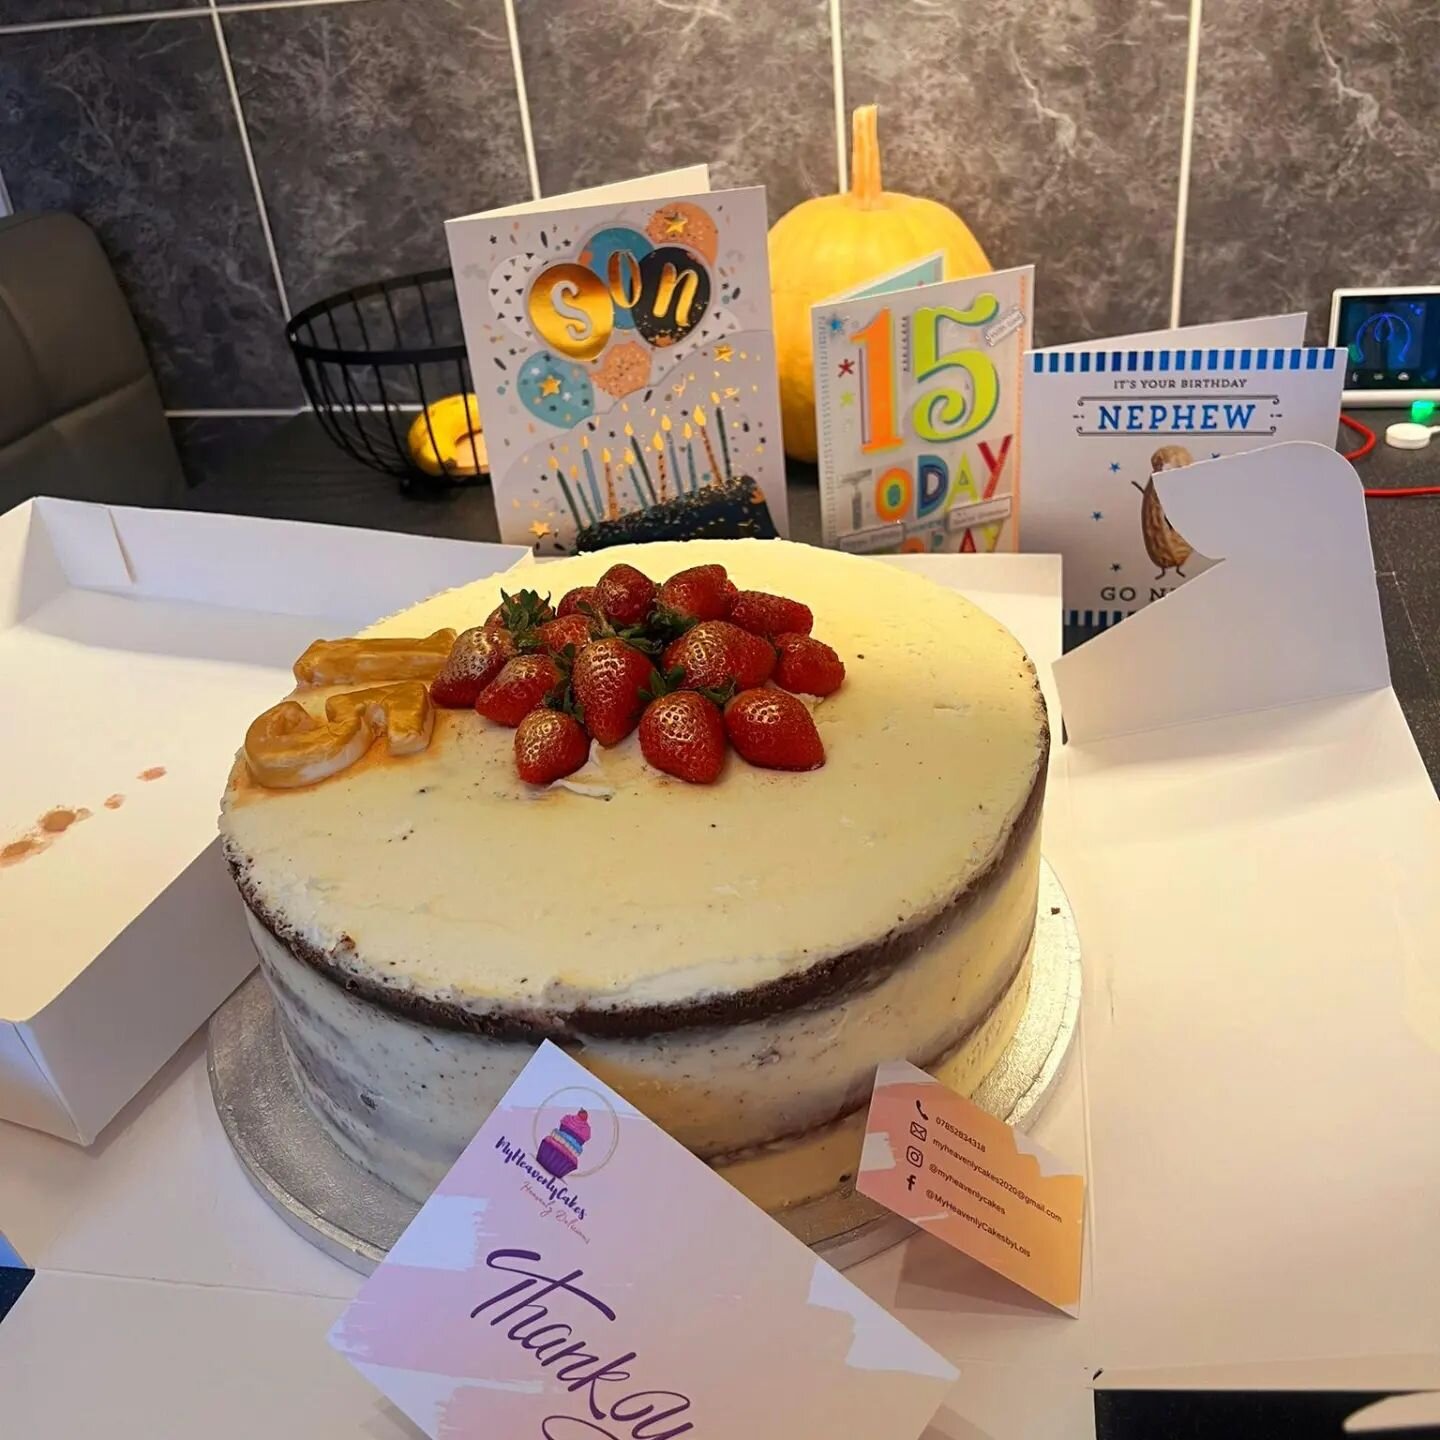 Every family birthday celebration  deserves a delicious home-baked cake🙂
This 3 layer 12 inch cake has 2 layers of vanilla with one red velvet layer in the middle.  Made this for cuz @kilo_75 for her son's 15th last week and it was thoroughly enjoye